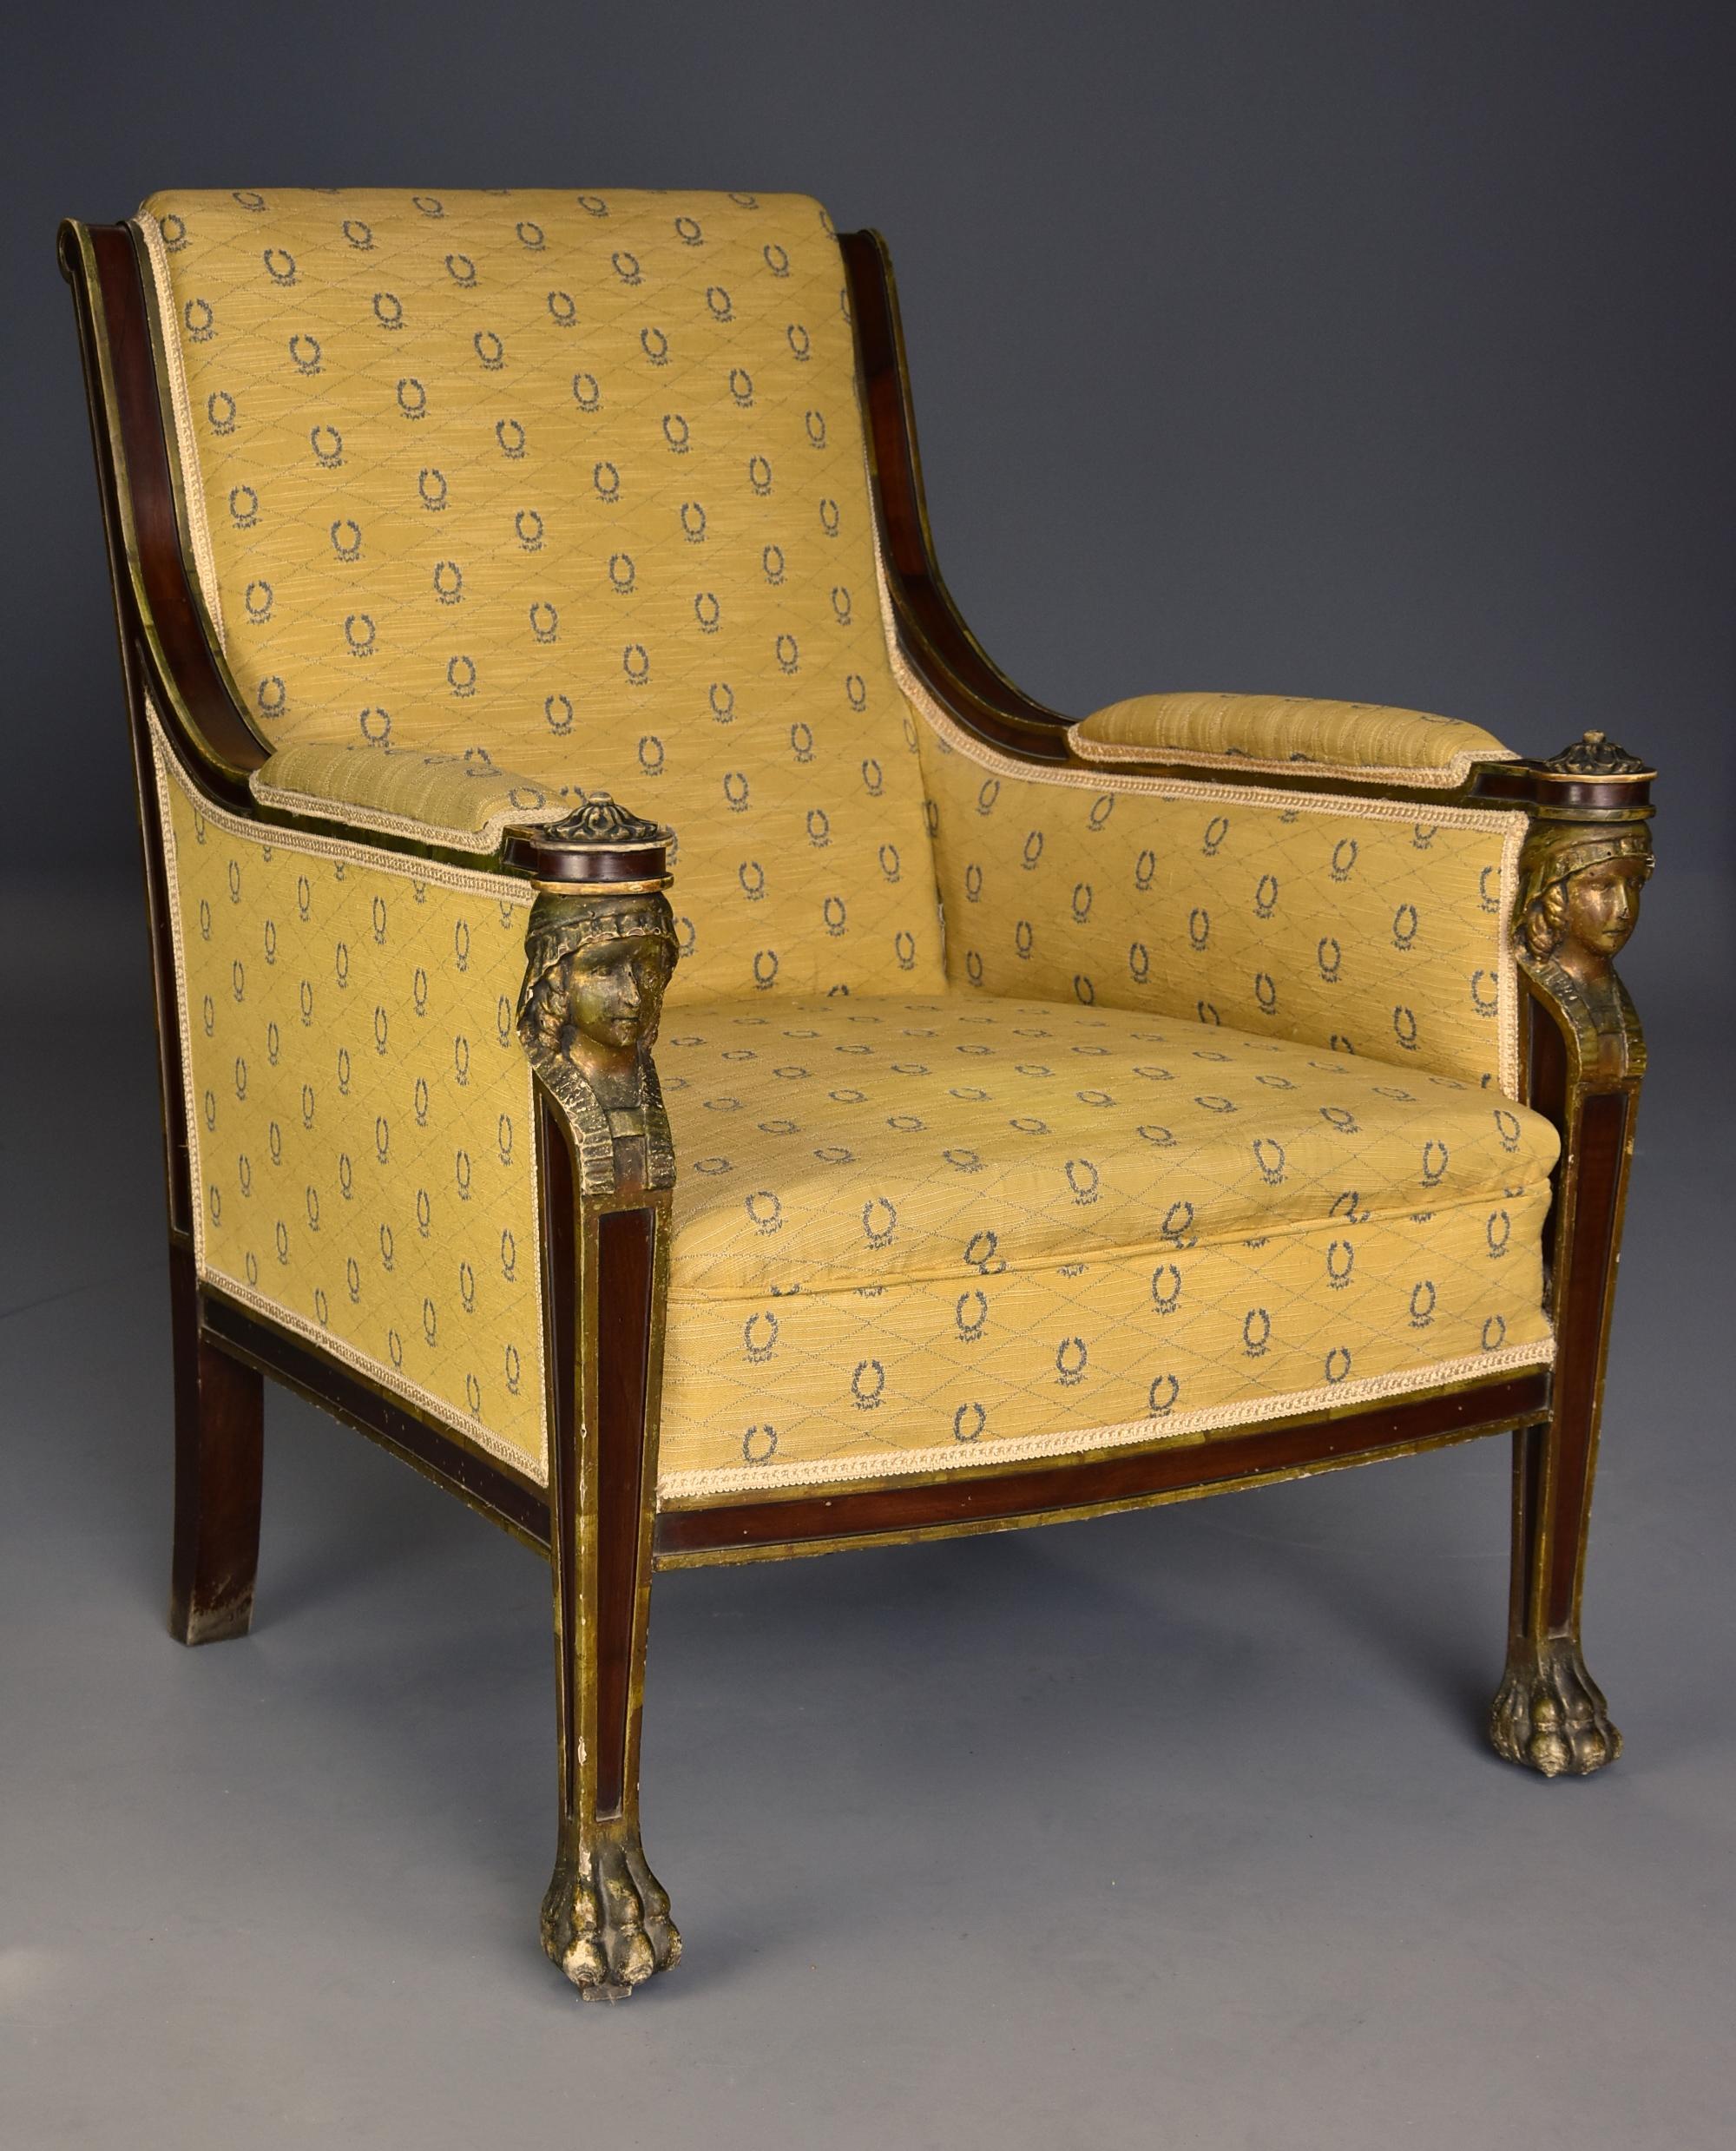 A highly decorative early 20th century French Empire style mahogany armchair with typical Egyptian influence.

This armchair consists of a mahogany frame, this being in original condition, having a 'bronze' paint effect, the mahogany uprights with